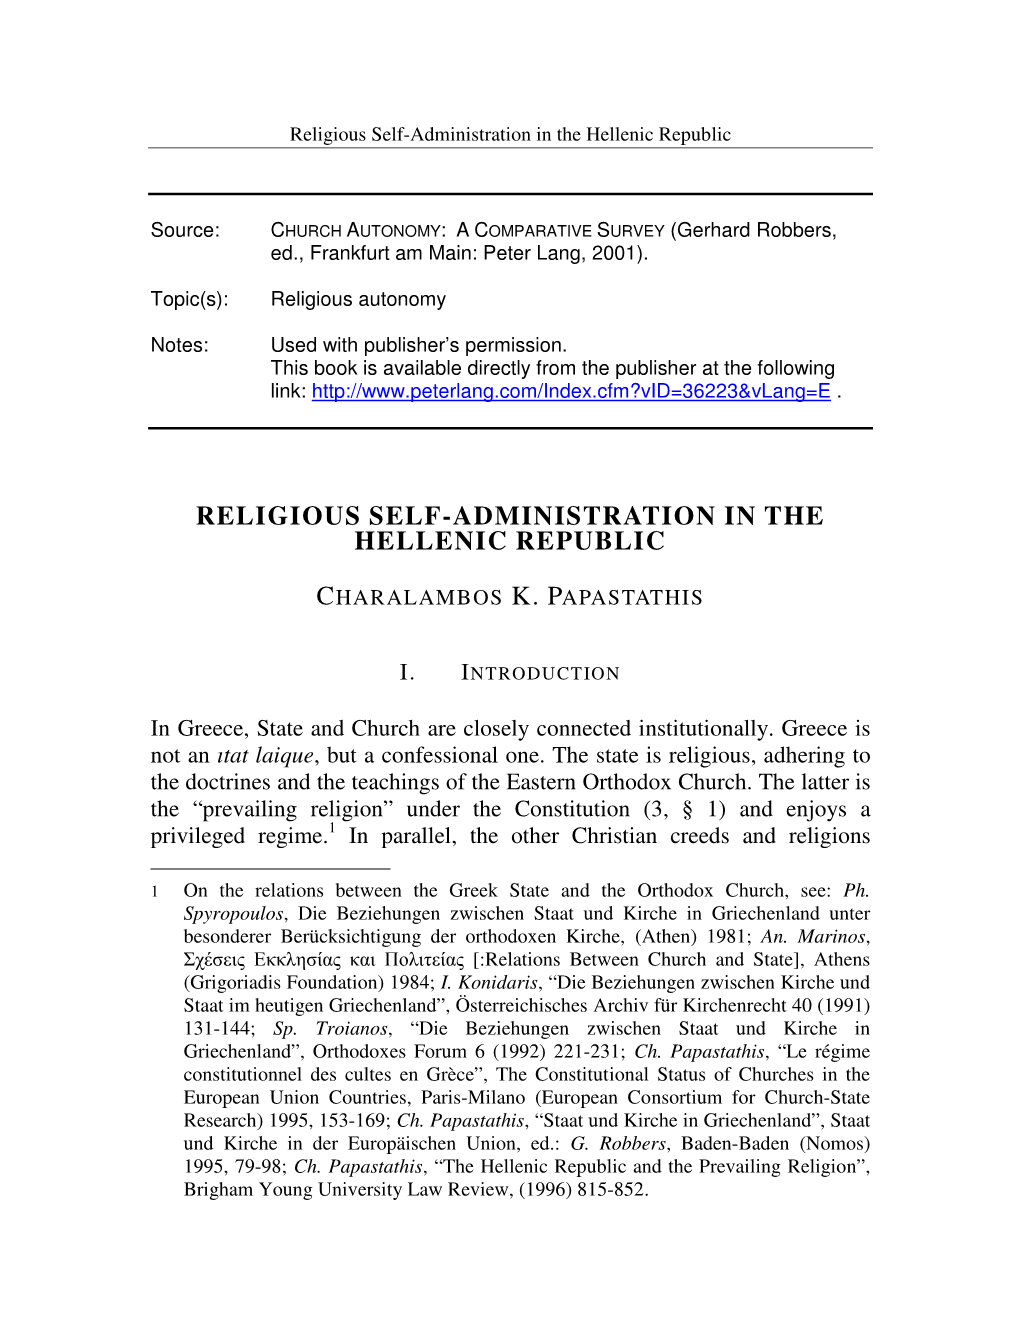 Religious Self-Administration in the Hellenic Republic